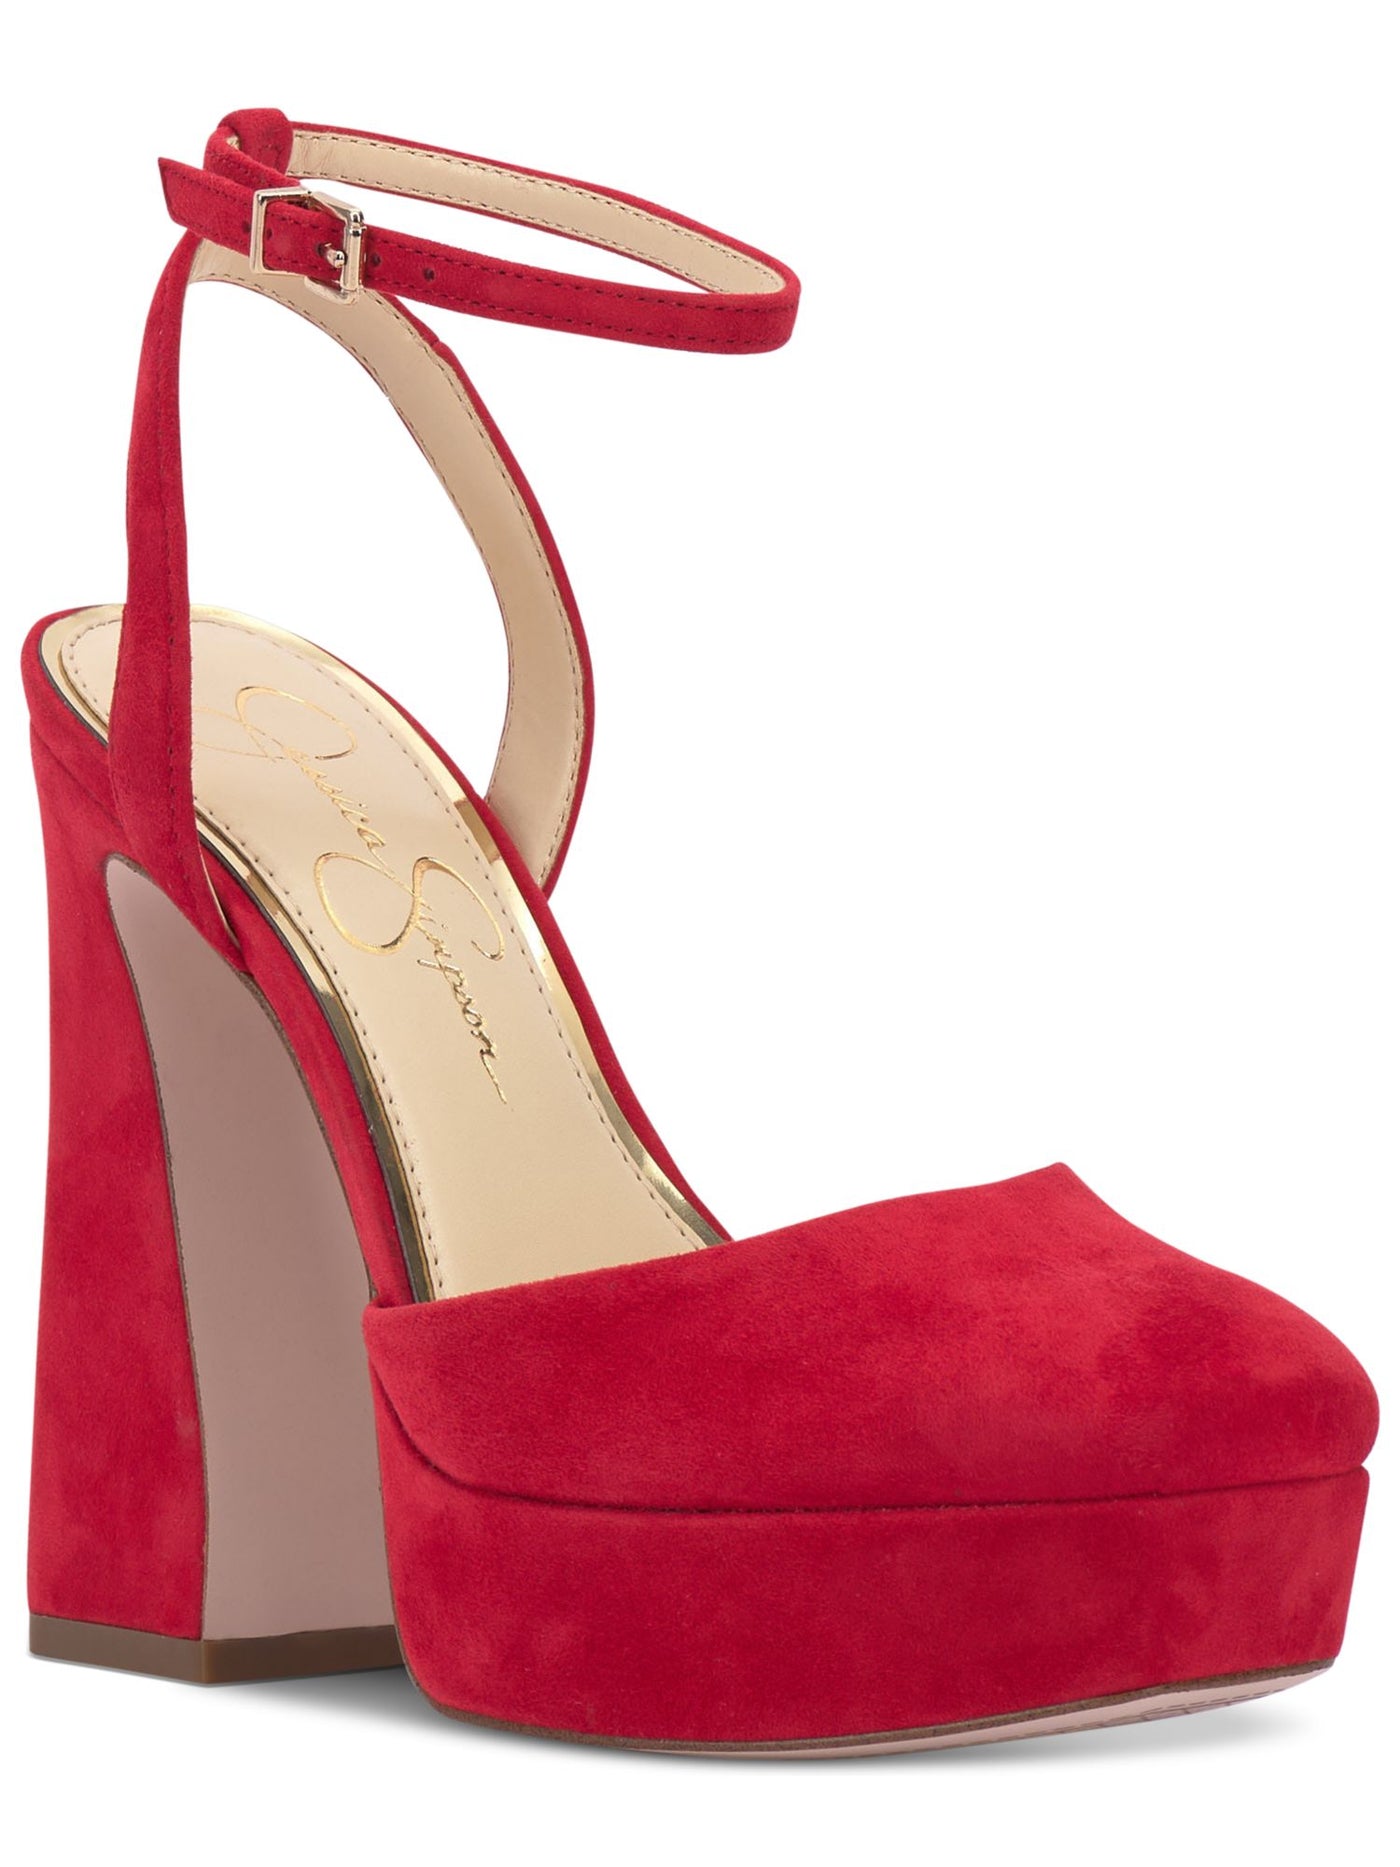 JESSICA SIMPSON Womens Red 1" Platform Adjustable Ankle Strap Deirae Round Toe Sculpted Heel Buckle Leather Dress Pumps Shoes 8.5 M